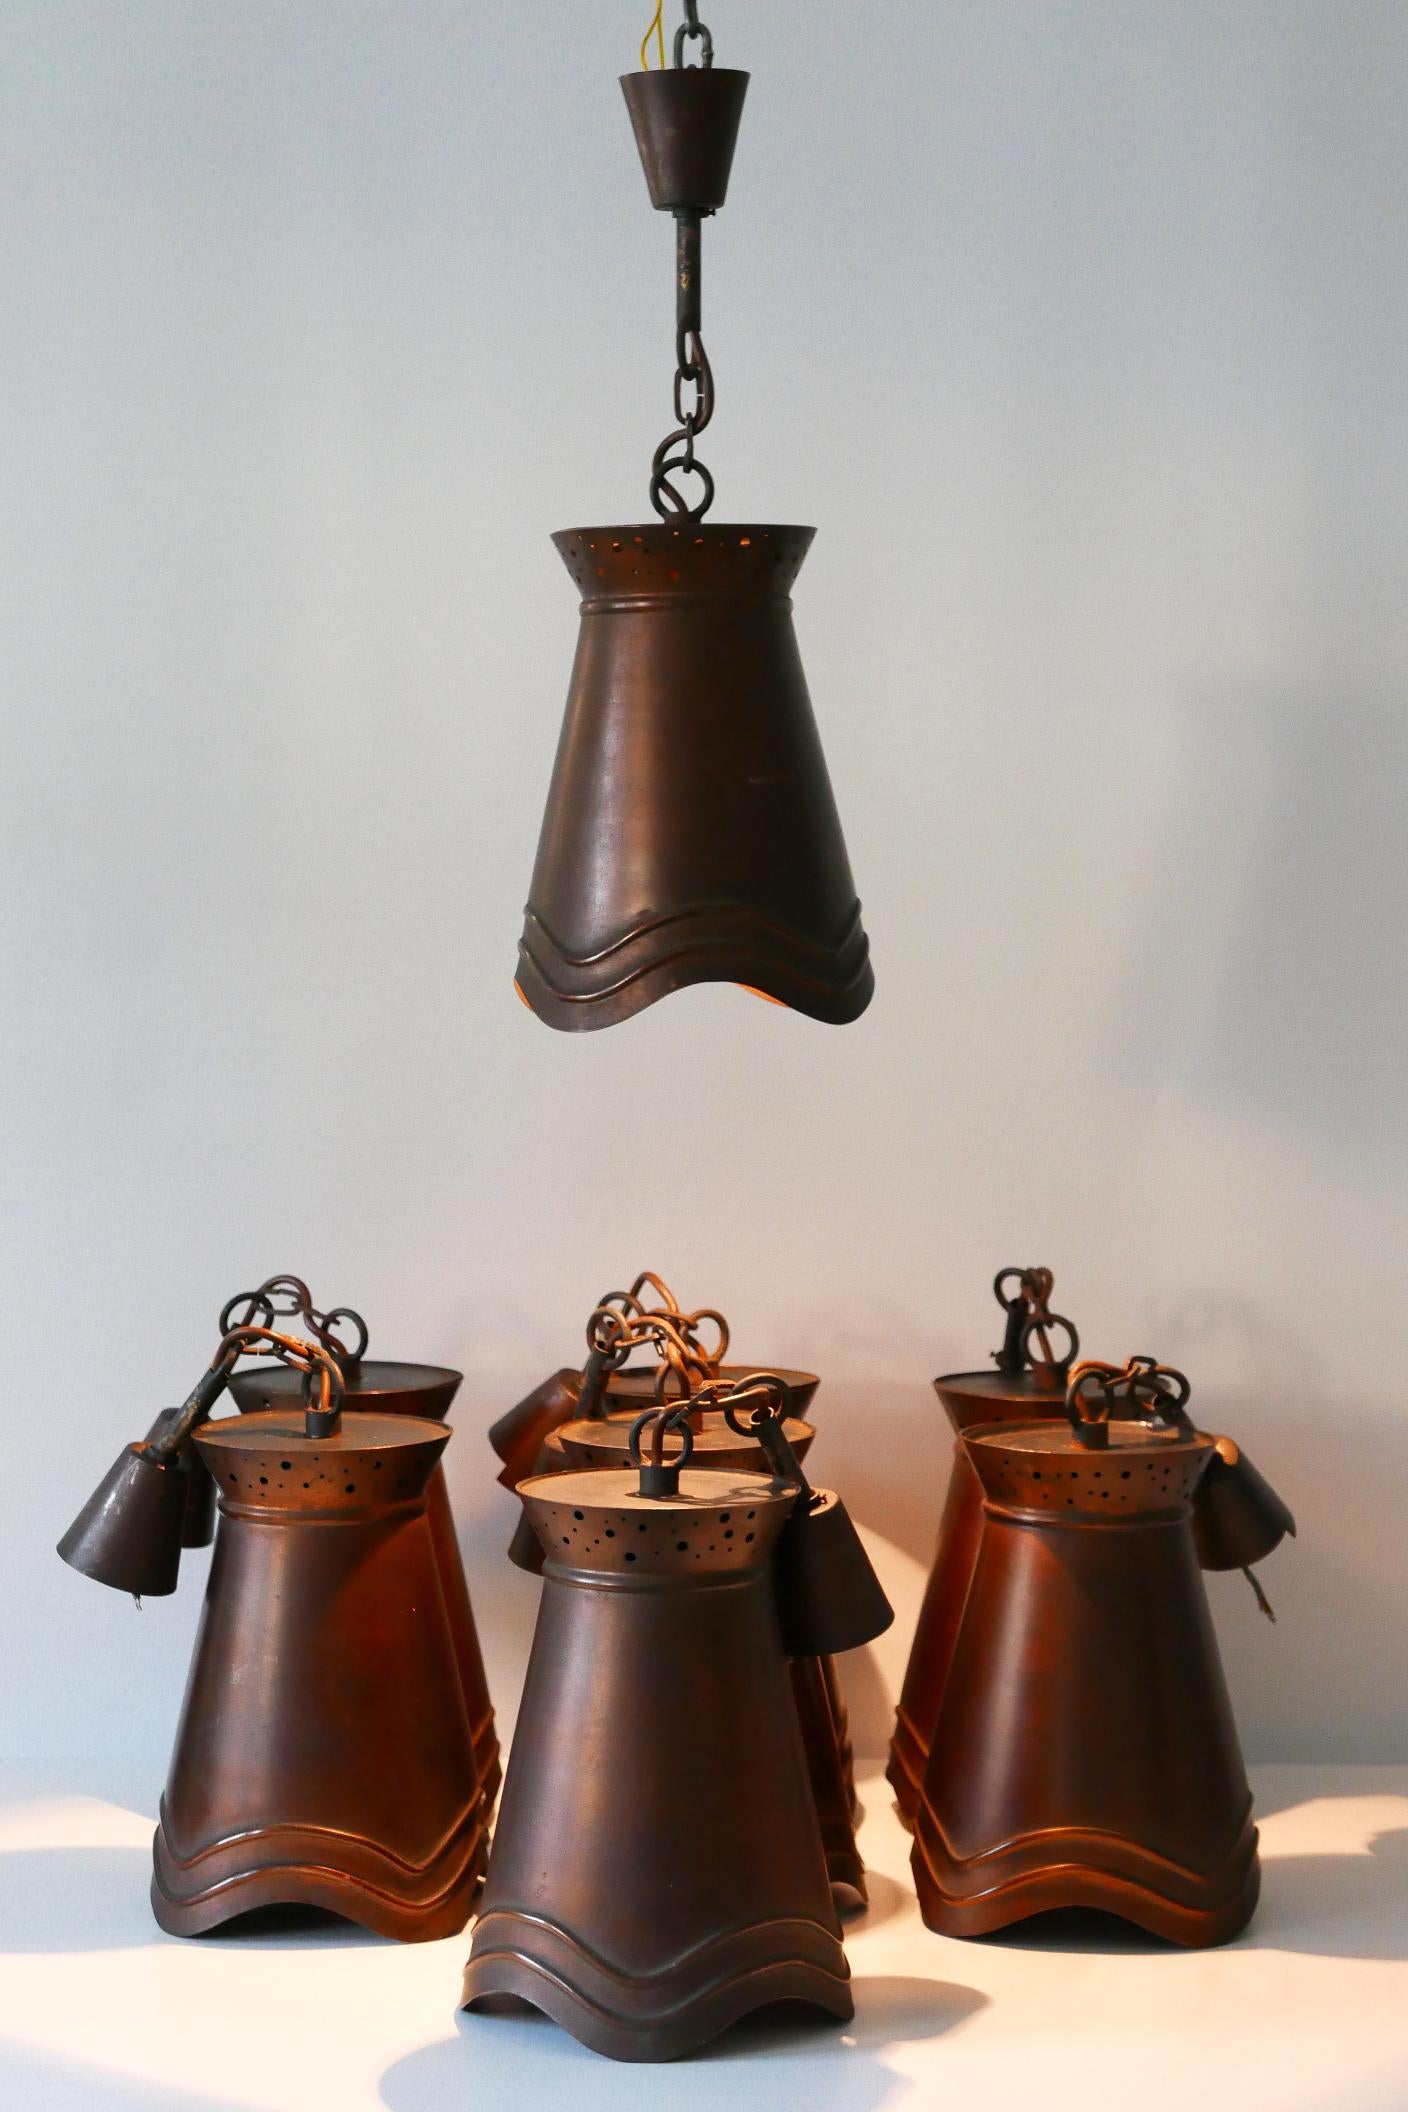 Mid-Century Modern Copper Pendant Lamps or Hanging Lights, Germany, 1950s For Sale 7